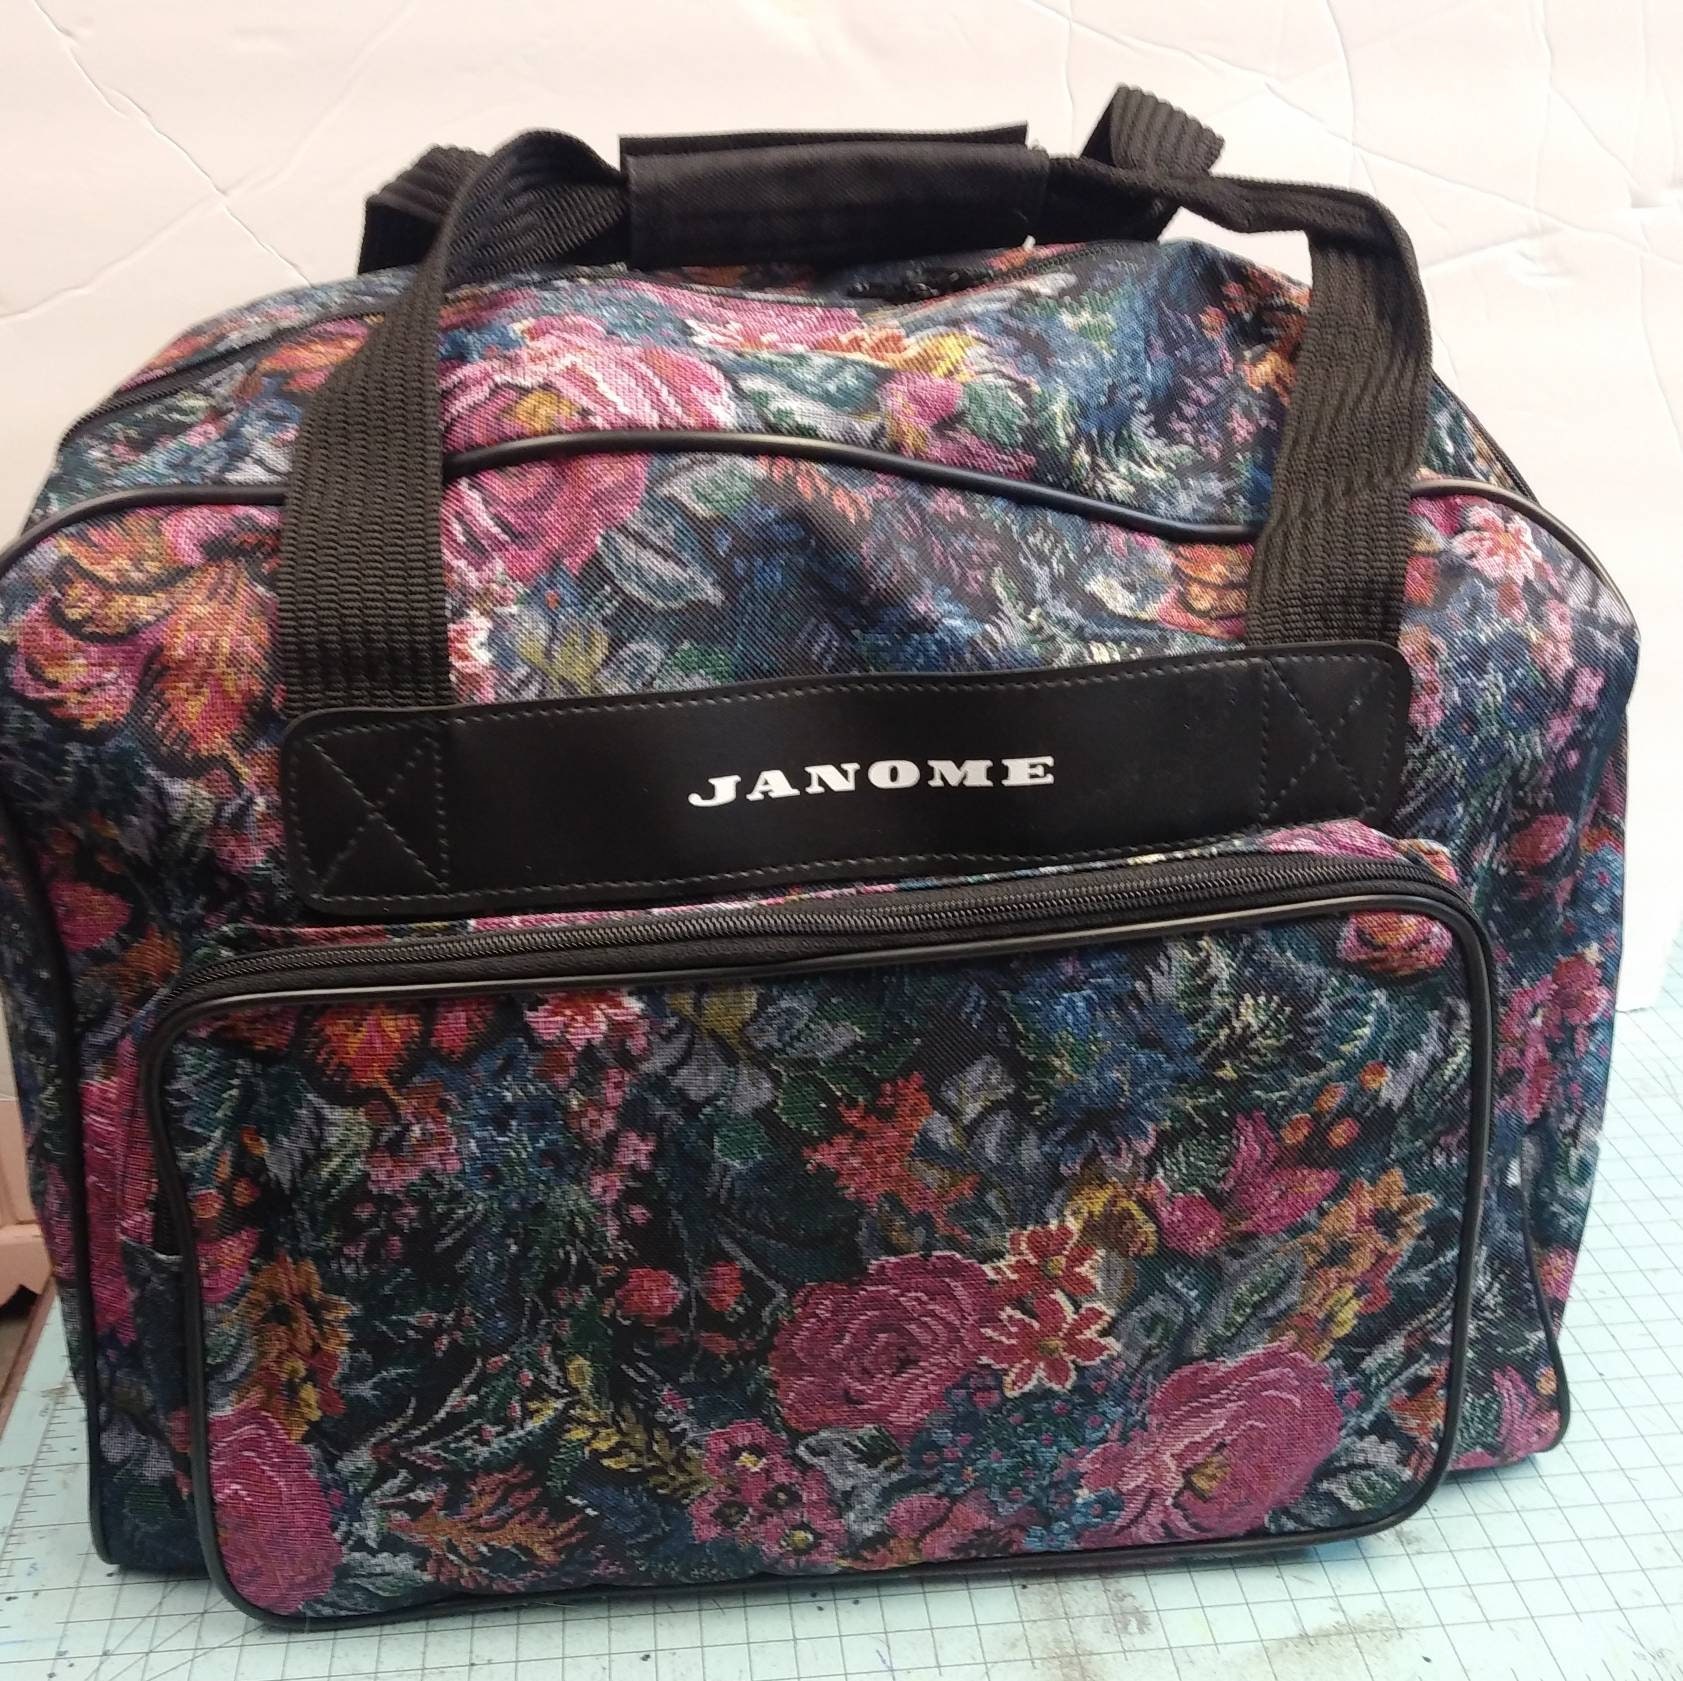 Janome Sewing Machine Tote Bag in Black Floral with Floral Pattern